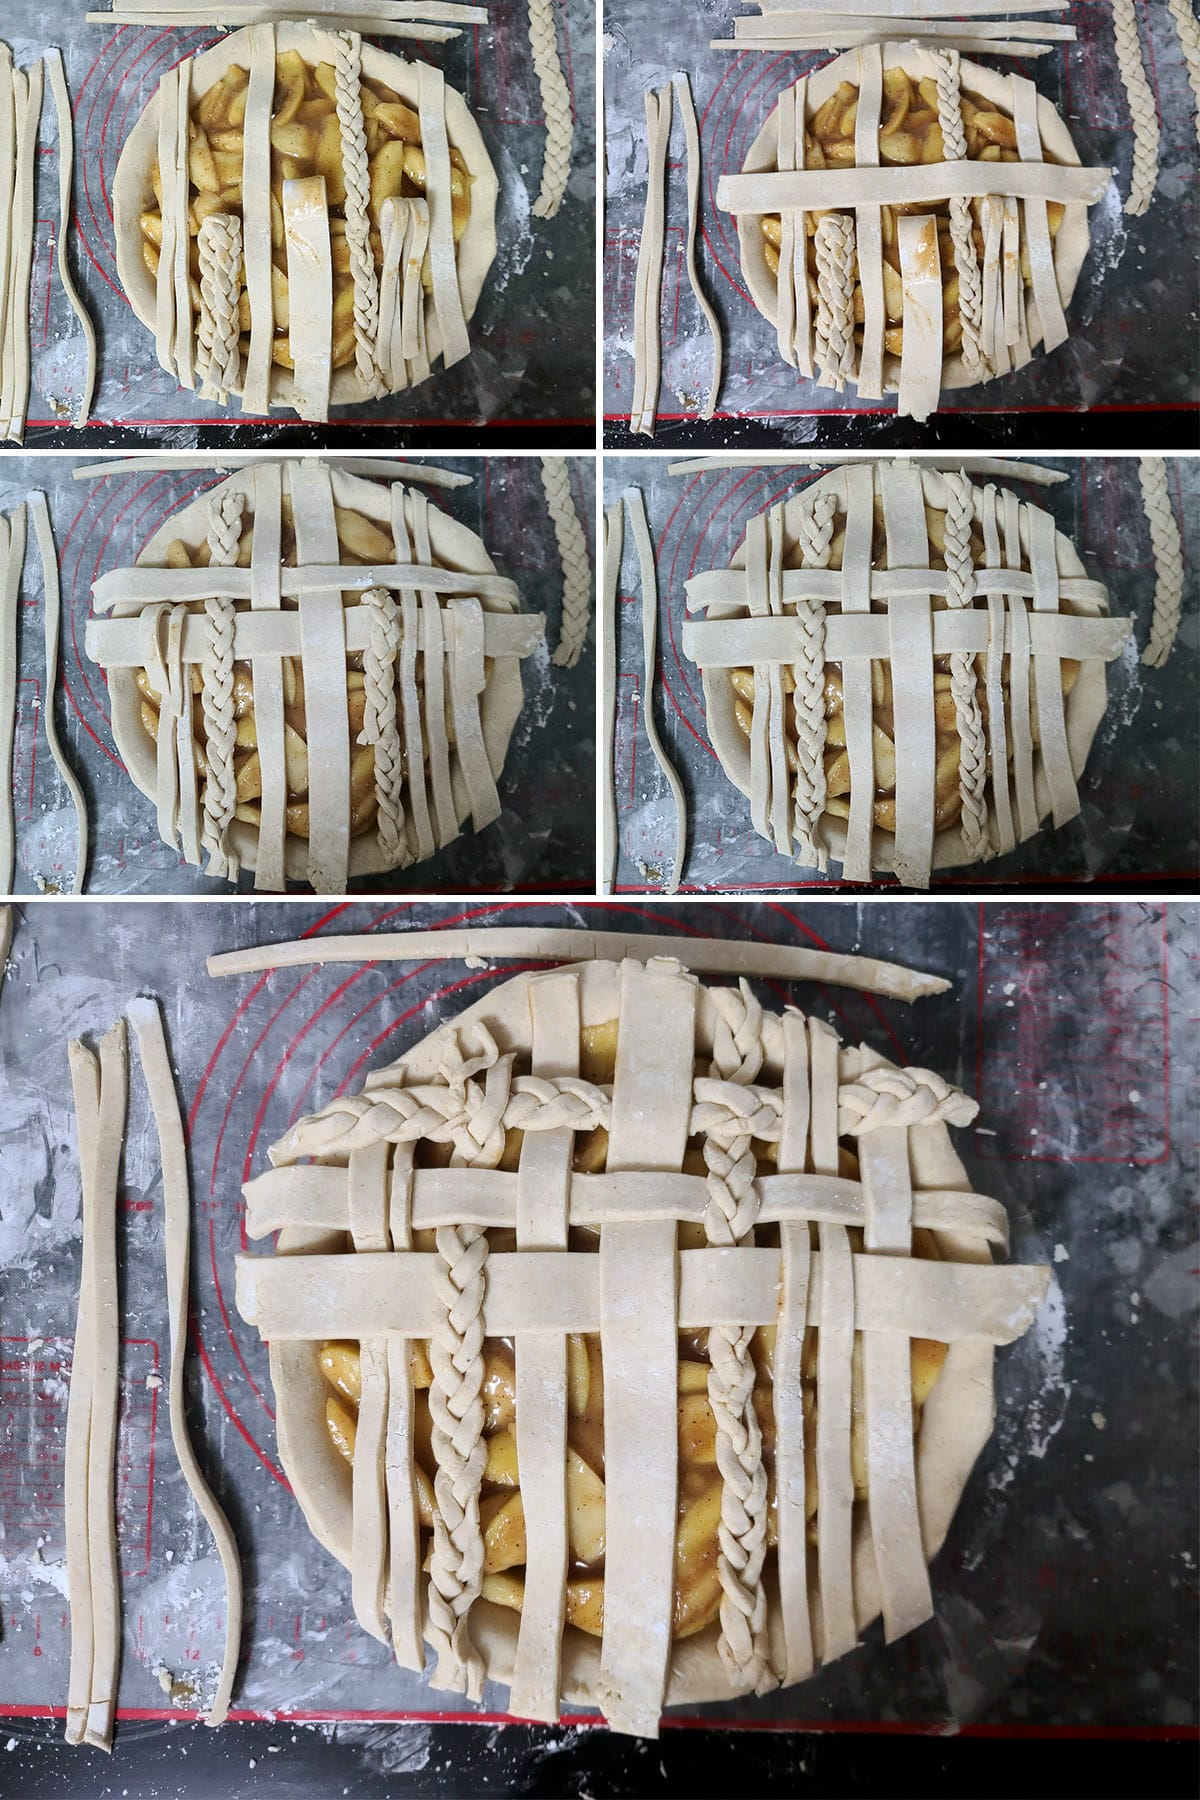 A 5 part image showing crosswise strips of pie crust being woven into the original row of pie crust strips.